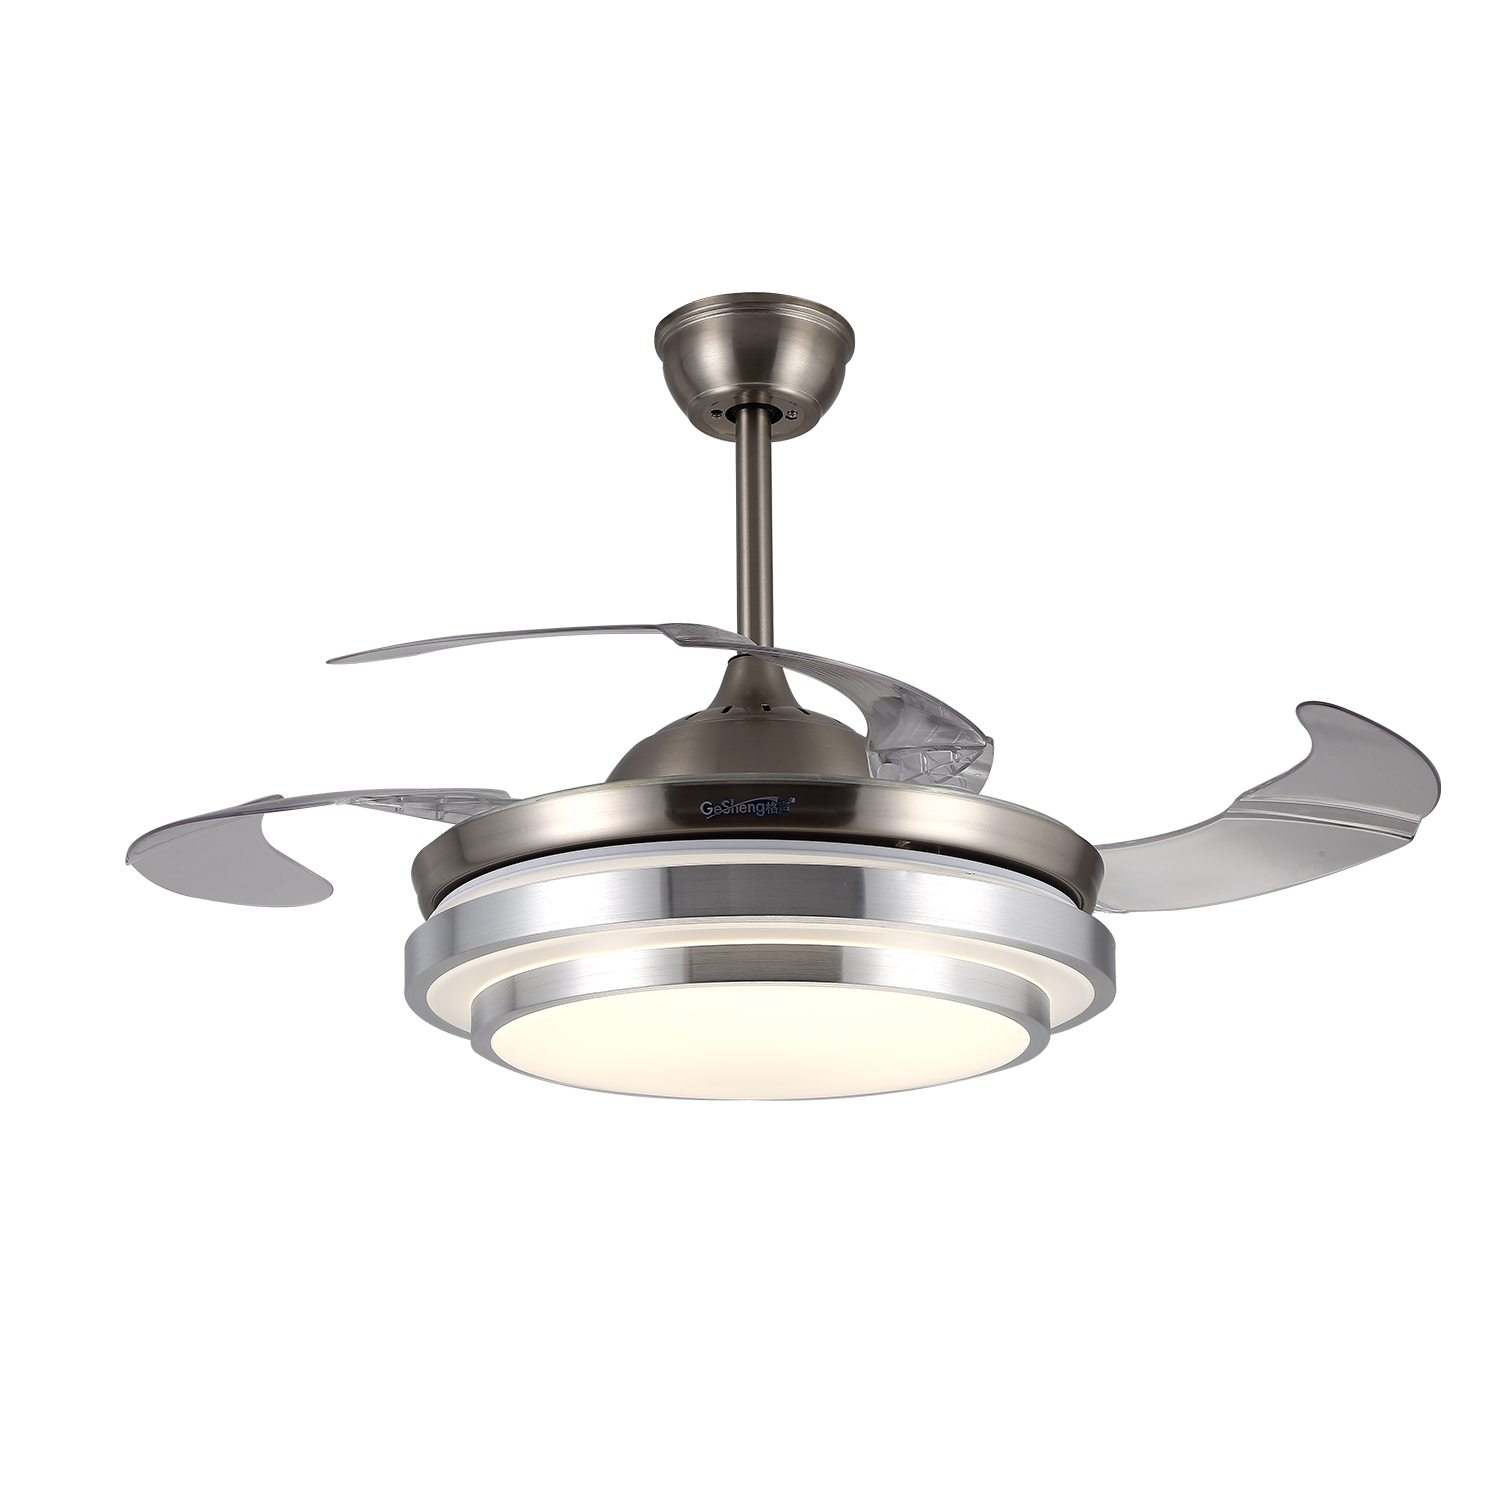 Modern 42 Inch Cheap Price 3 ABS Invisible Hidden Blades Dc Bldc Remote Control Retractable Ceiling Fan with LED Light